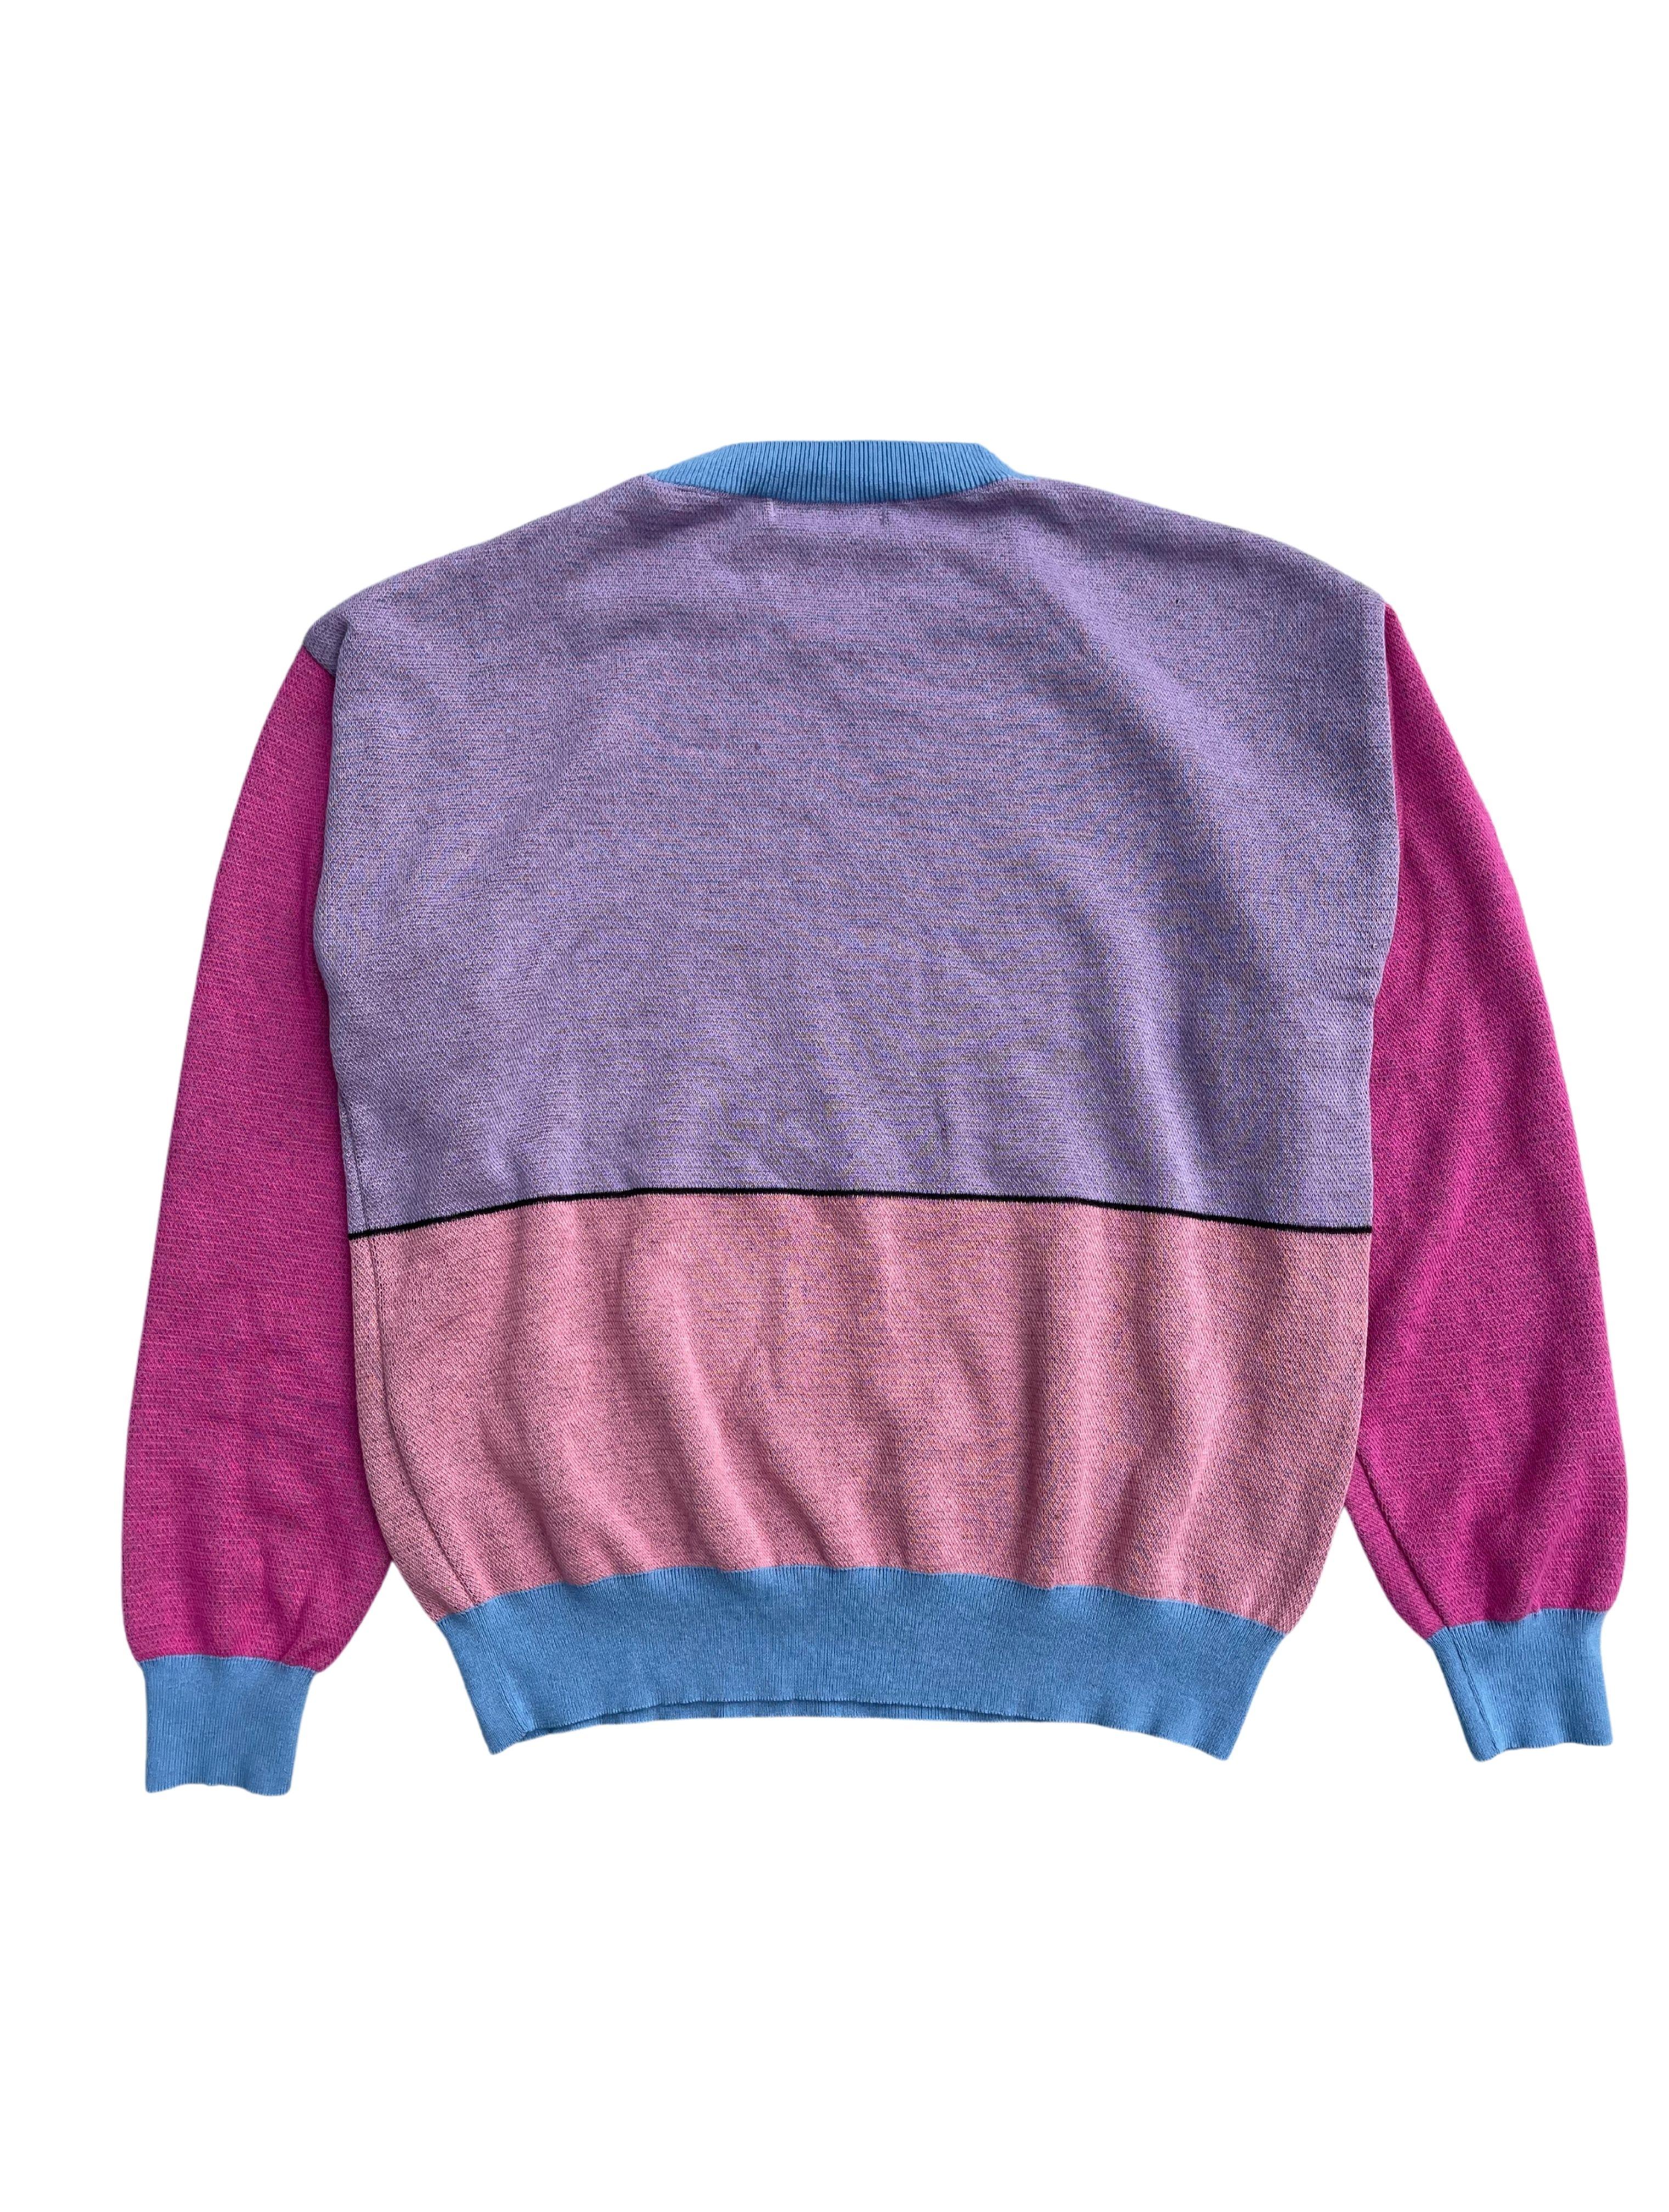 hysteric glamour sweater